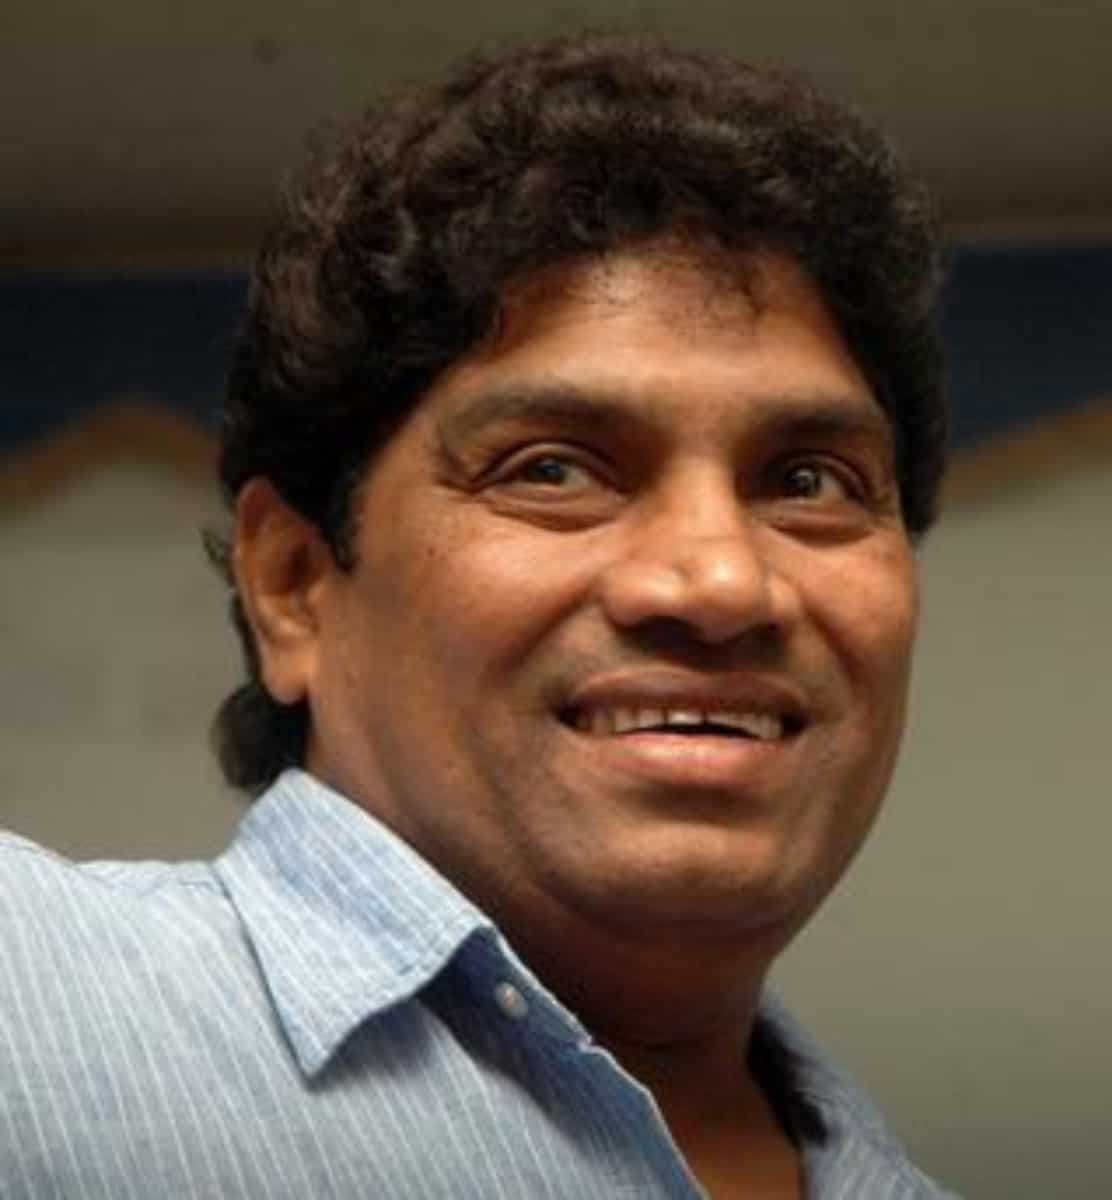 Took break from work to serve humanity and thank God: Johnny Lever